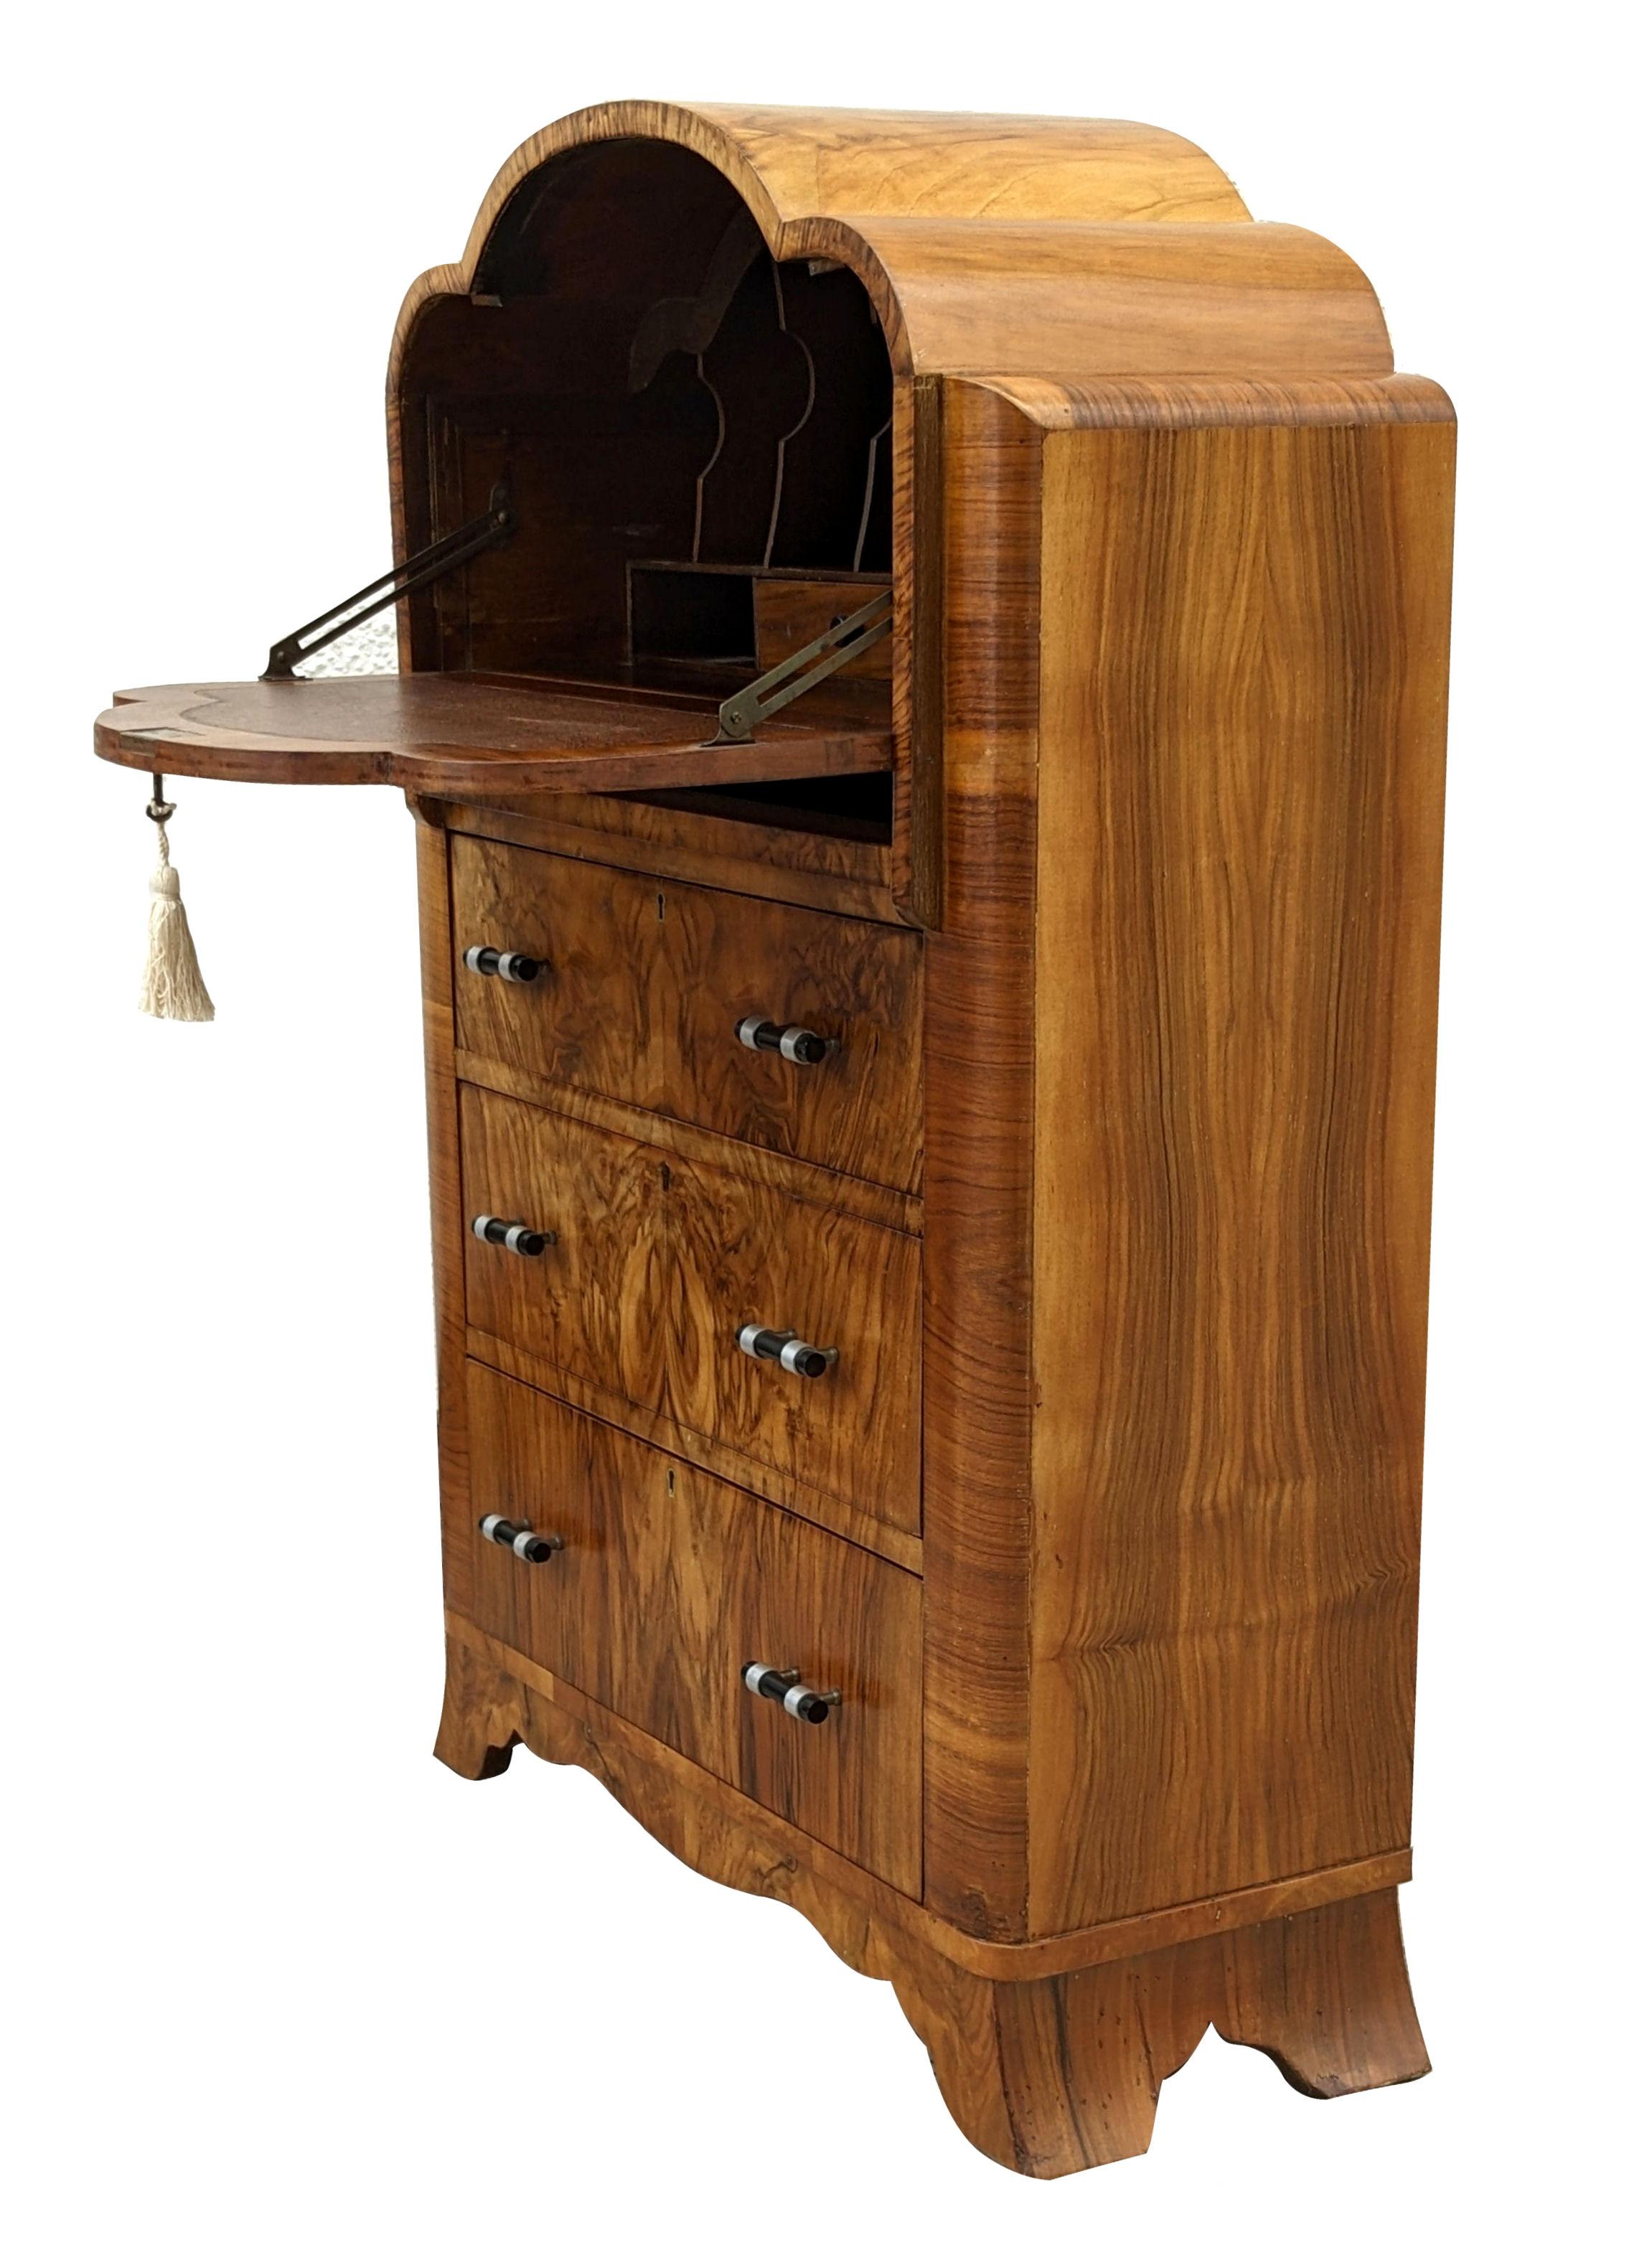 This is a fantastic 1930s Art Deco writing bureau of small proportions, a really superb piece of furniture. Veneered in a lovely figured walnut 'Flame Grain' with three drawers to the base and a pull down top reveals a desk area with slots for